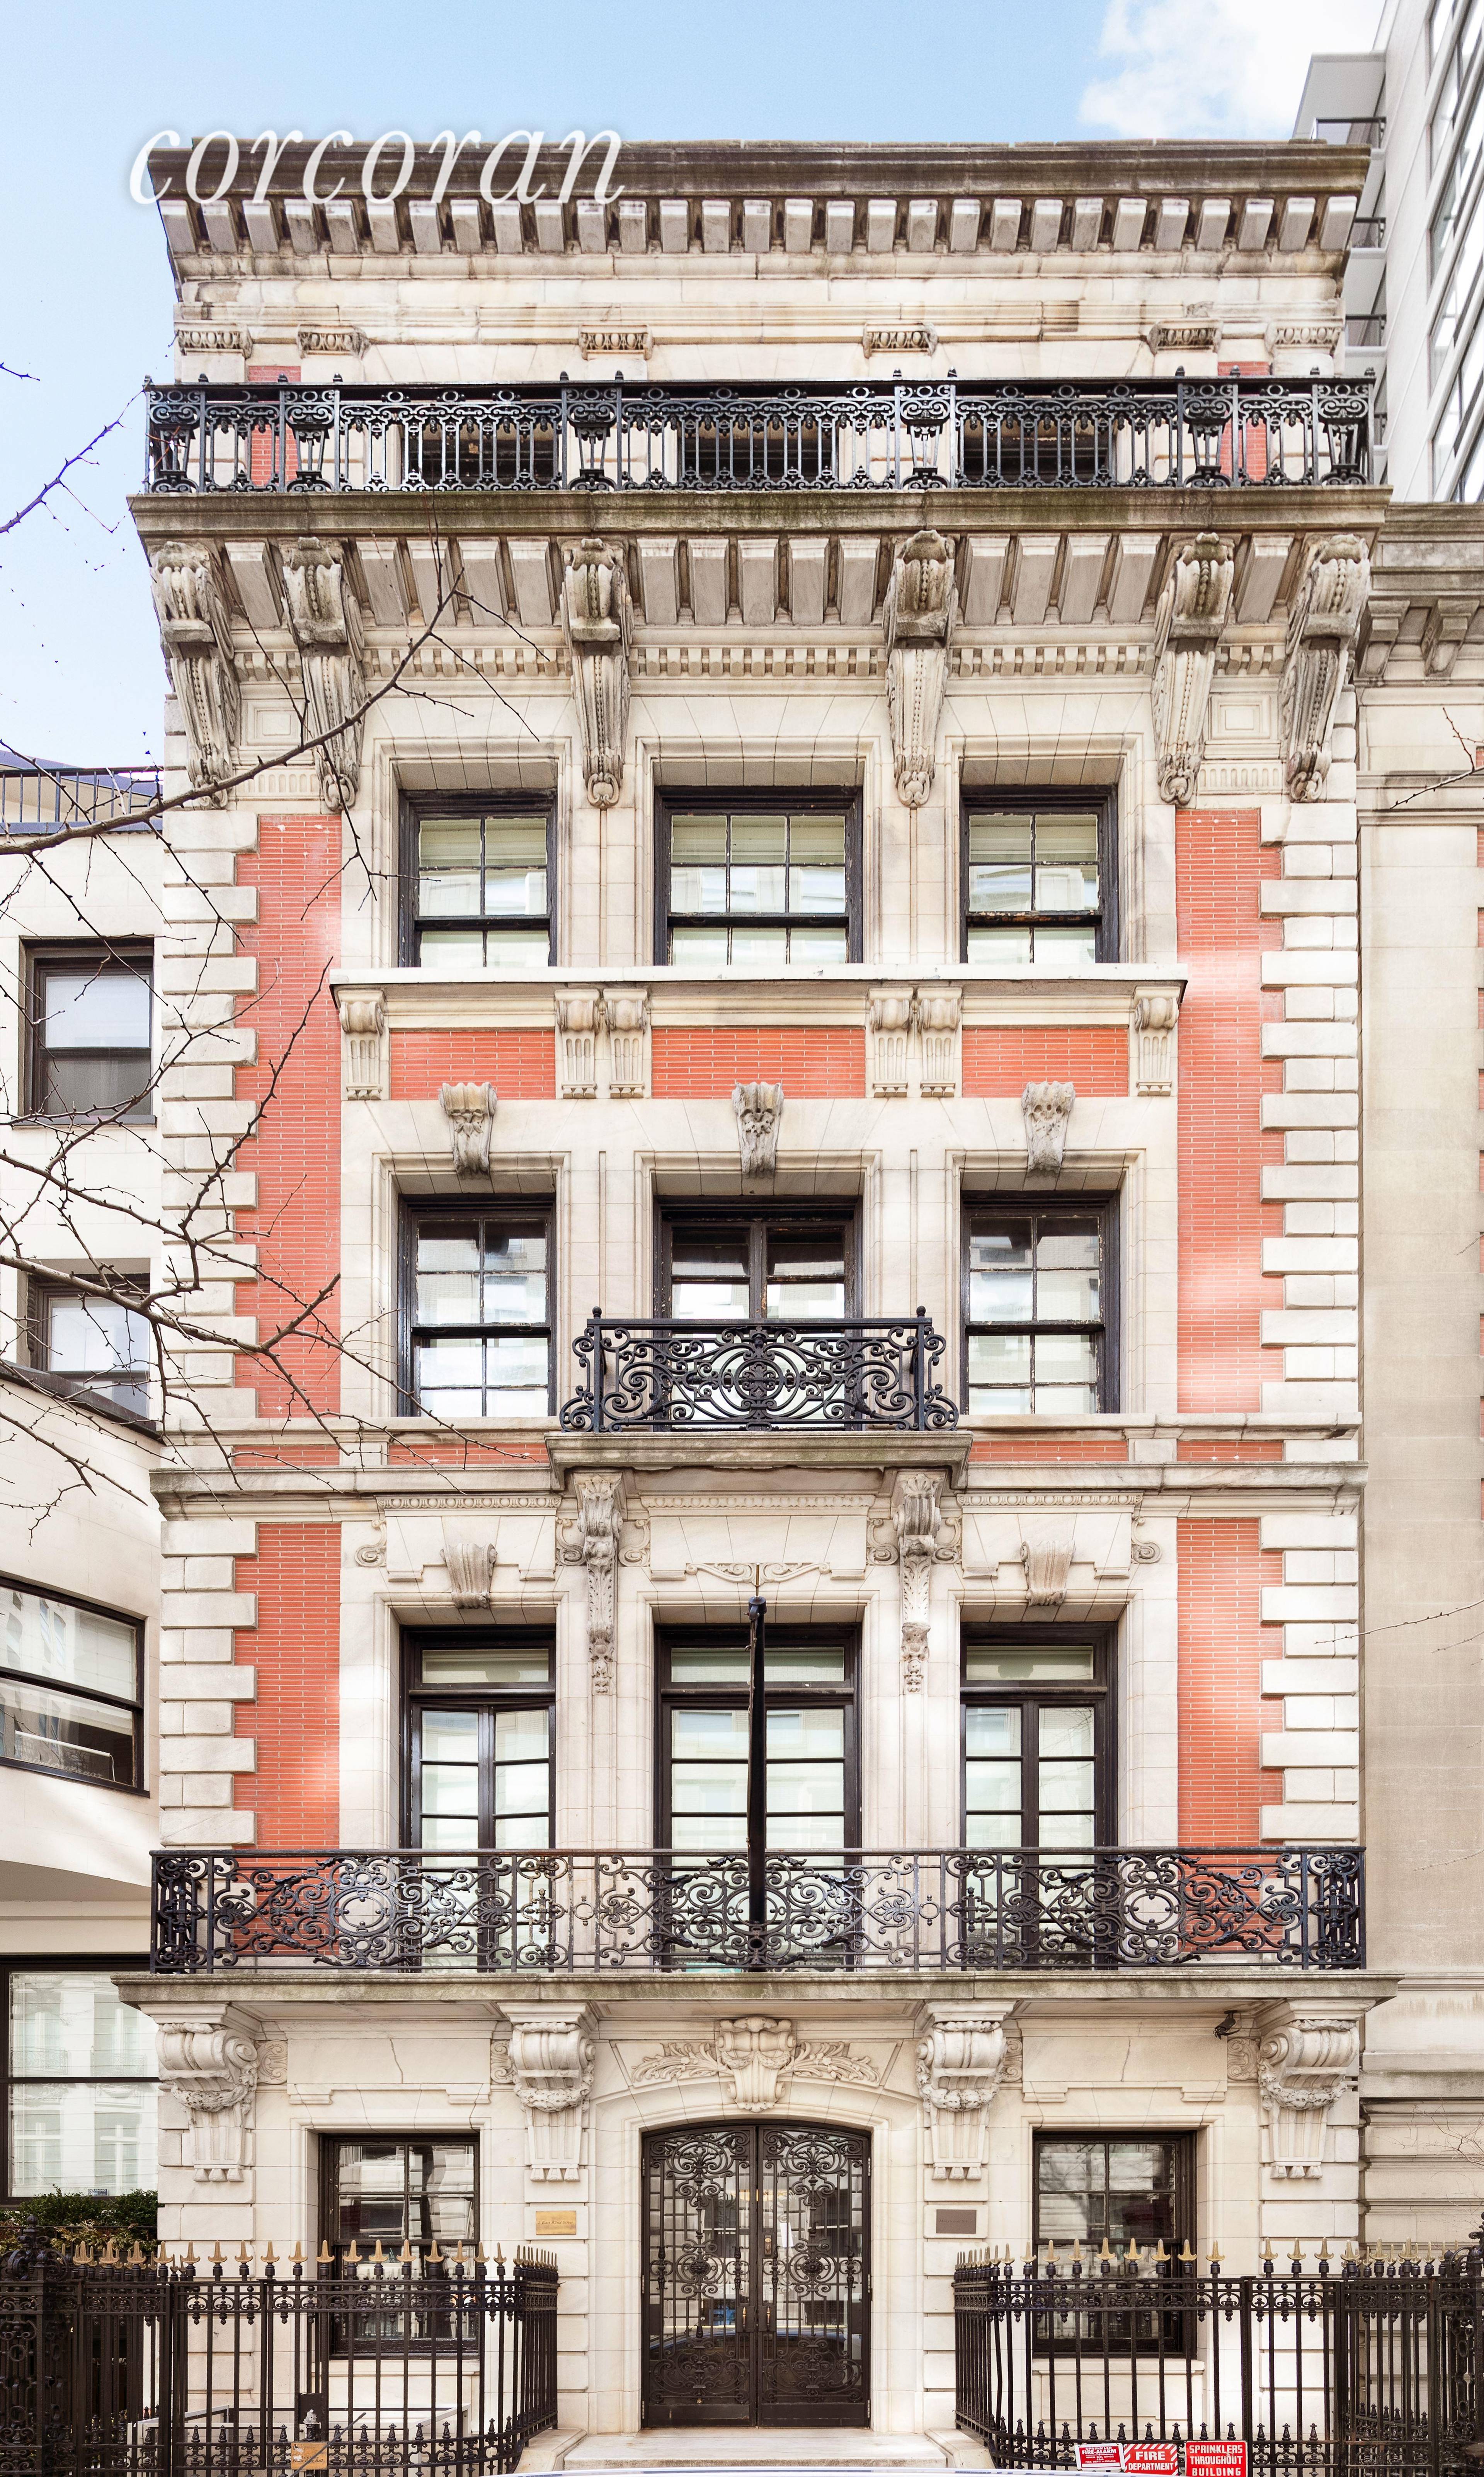 HISTORY AND ARCHITECTURECurrently home to Marymount School of New York, this grand property measures 25 feet wide built full on a 100 foot deep lot.